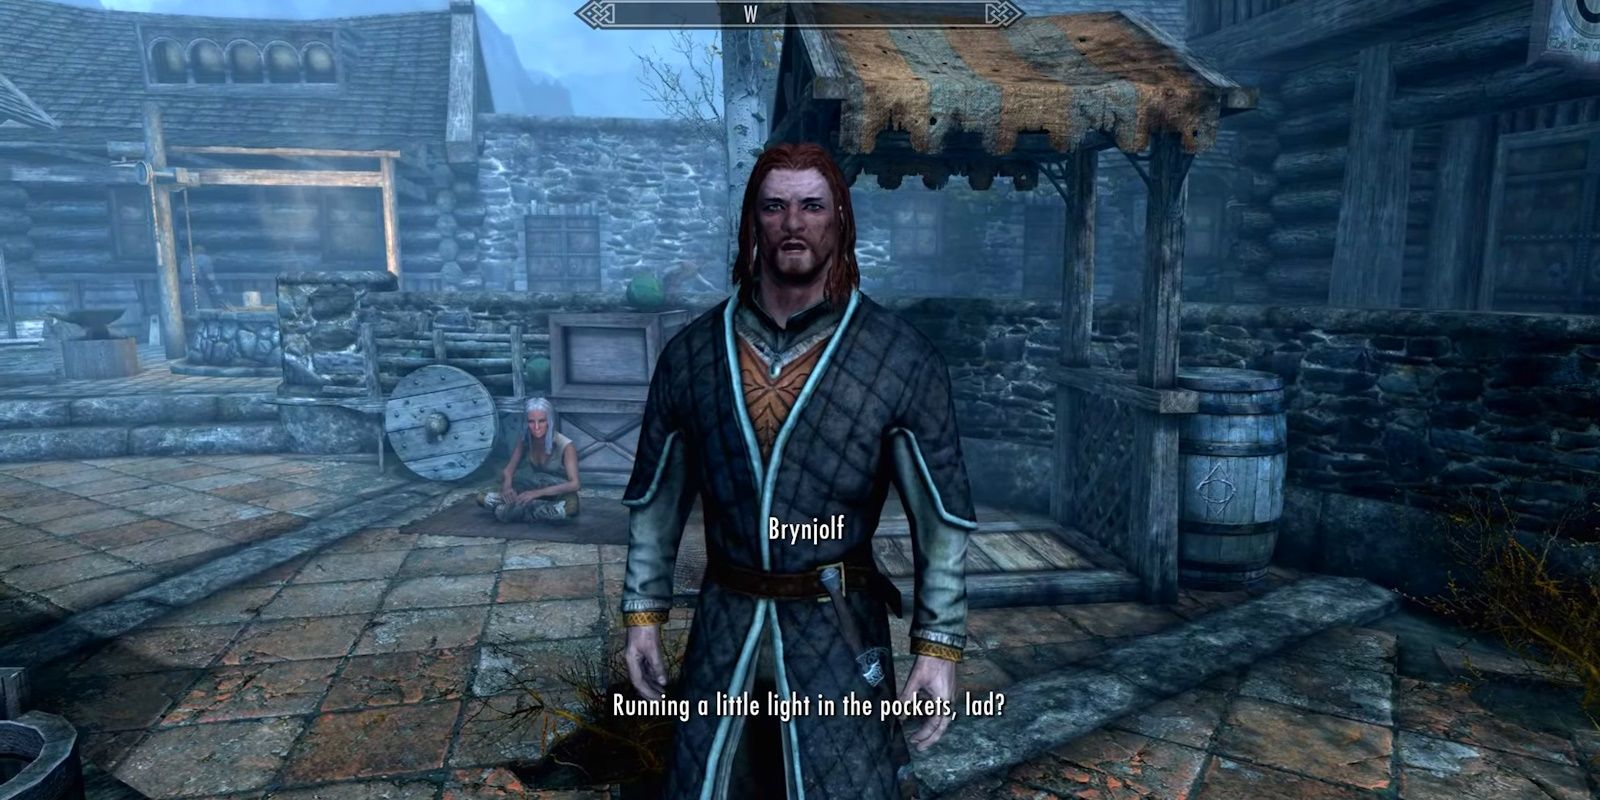 Brynjolf when first meeting the player in Skyrim